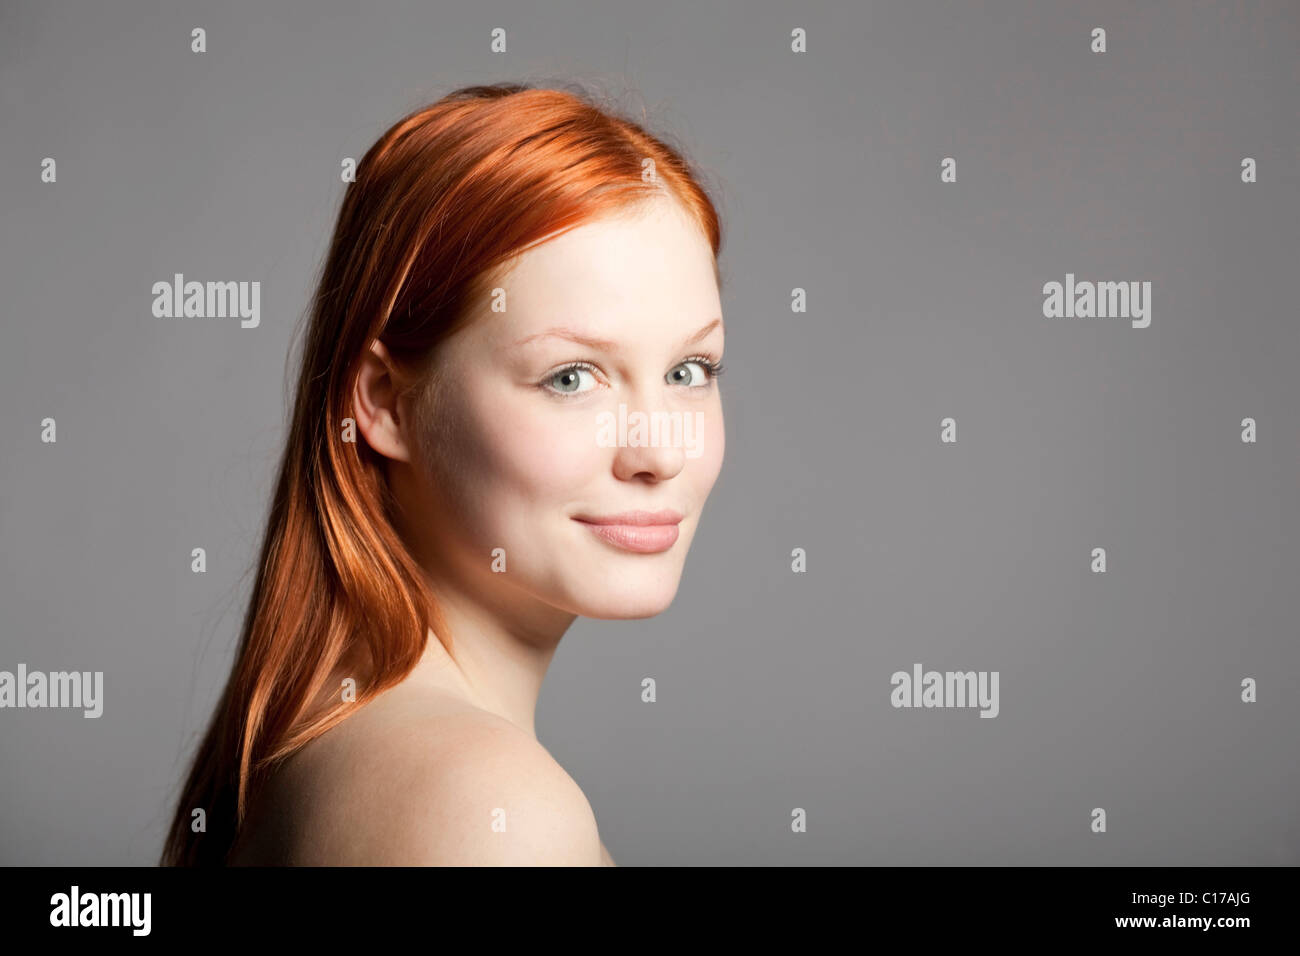 Young, red-haired woman looking at the camera Stock Photo